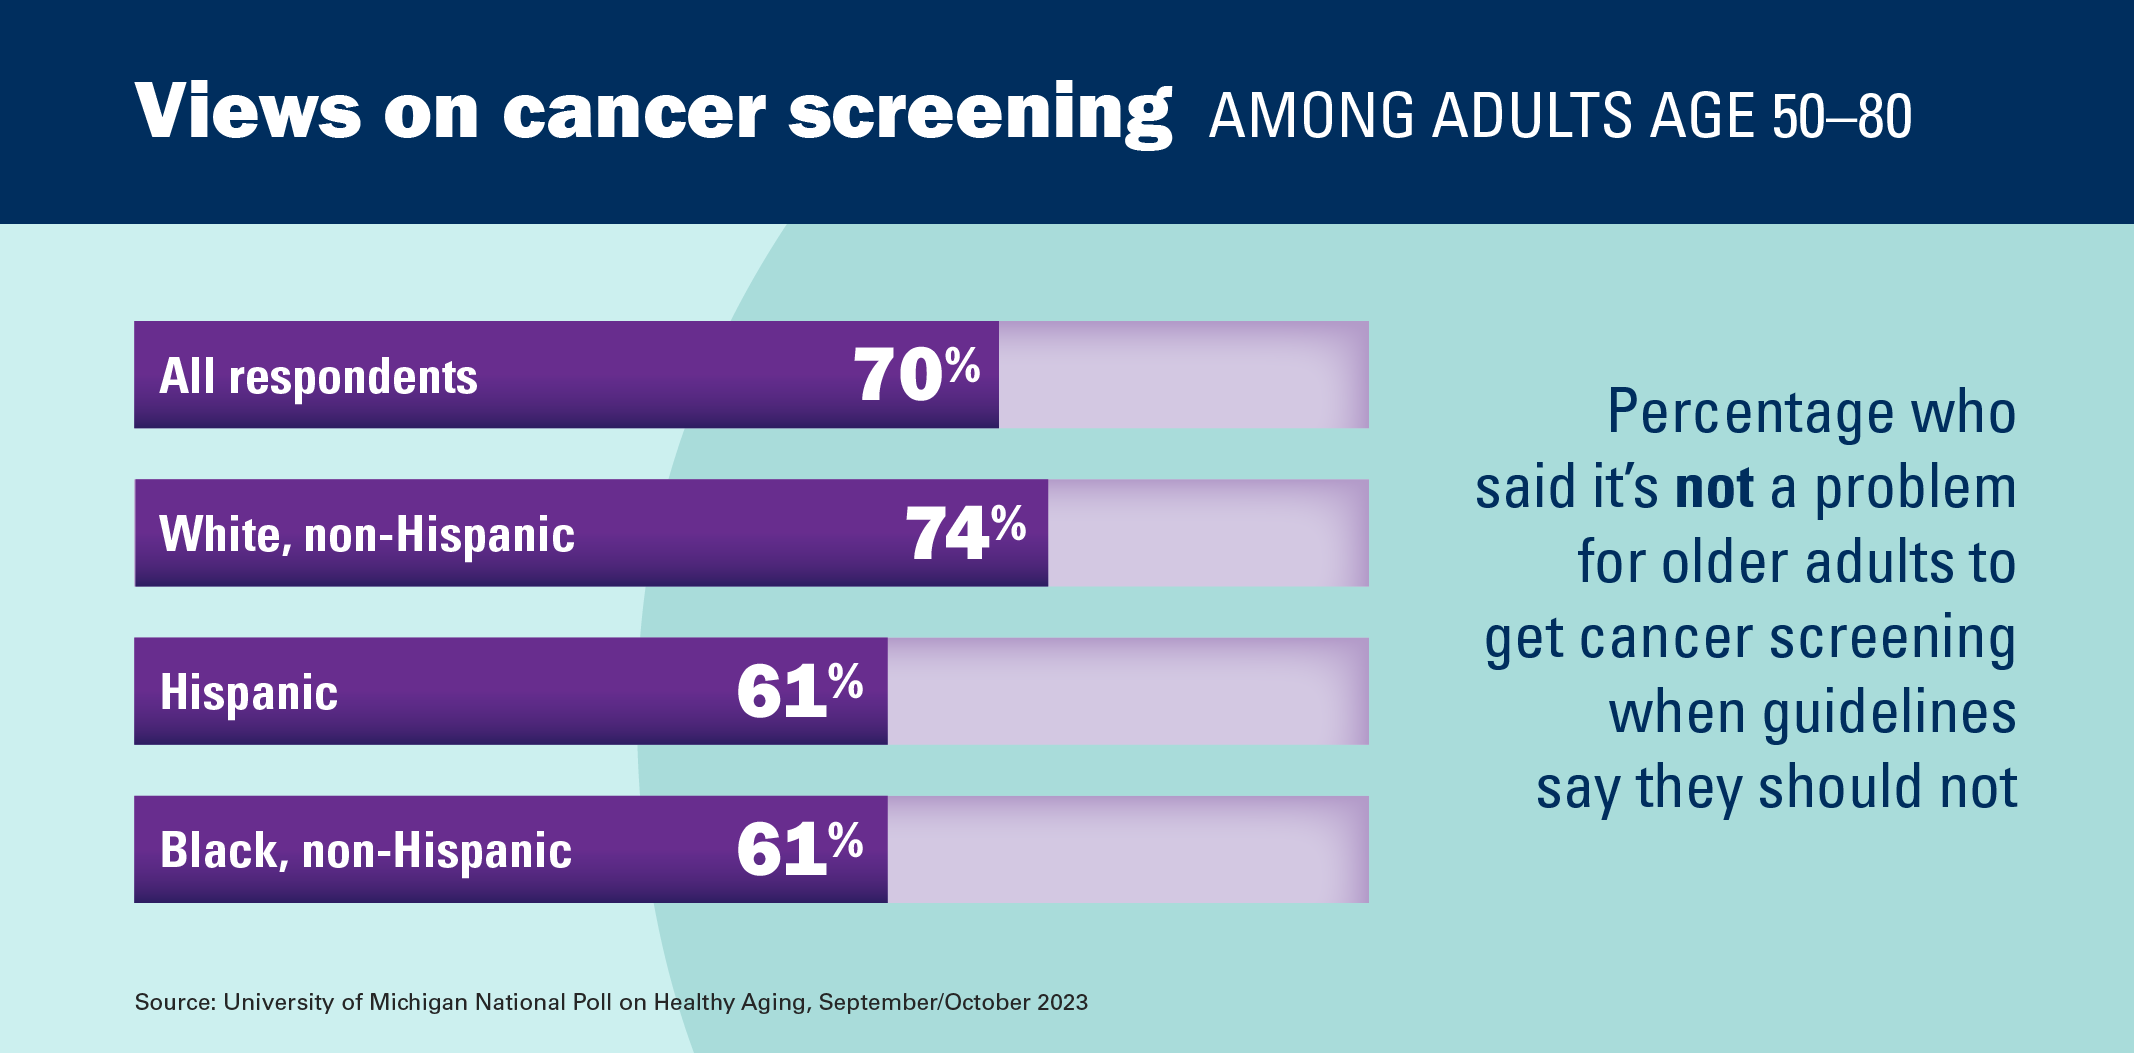 Views on cancer screening among adults age 50-80; 70% of all respondents said it's not a problem for older adults to get cancer screening when guidelines say they should not